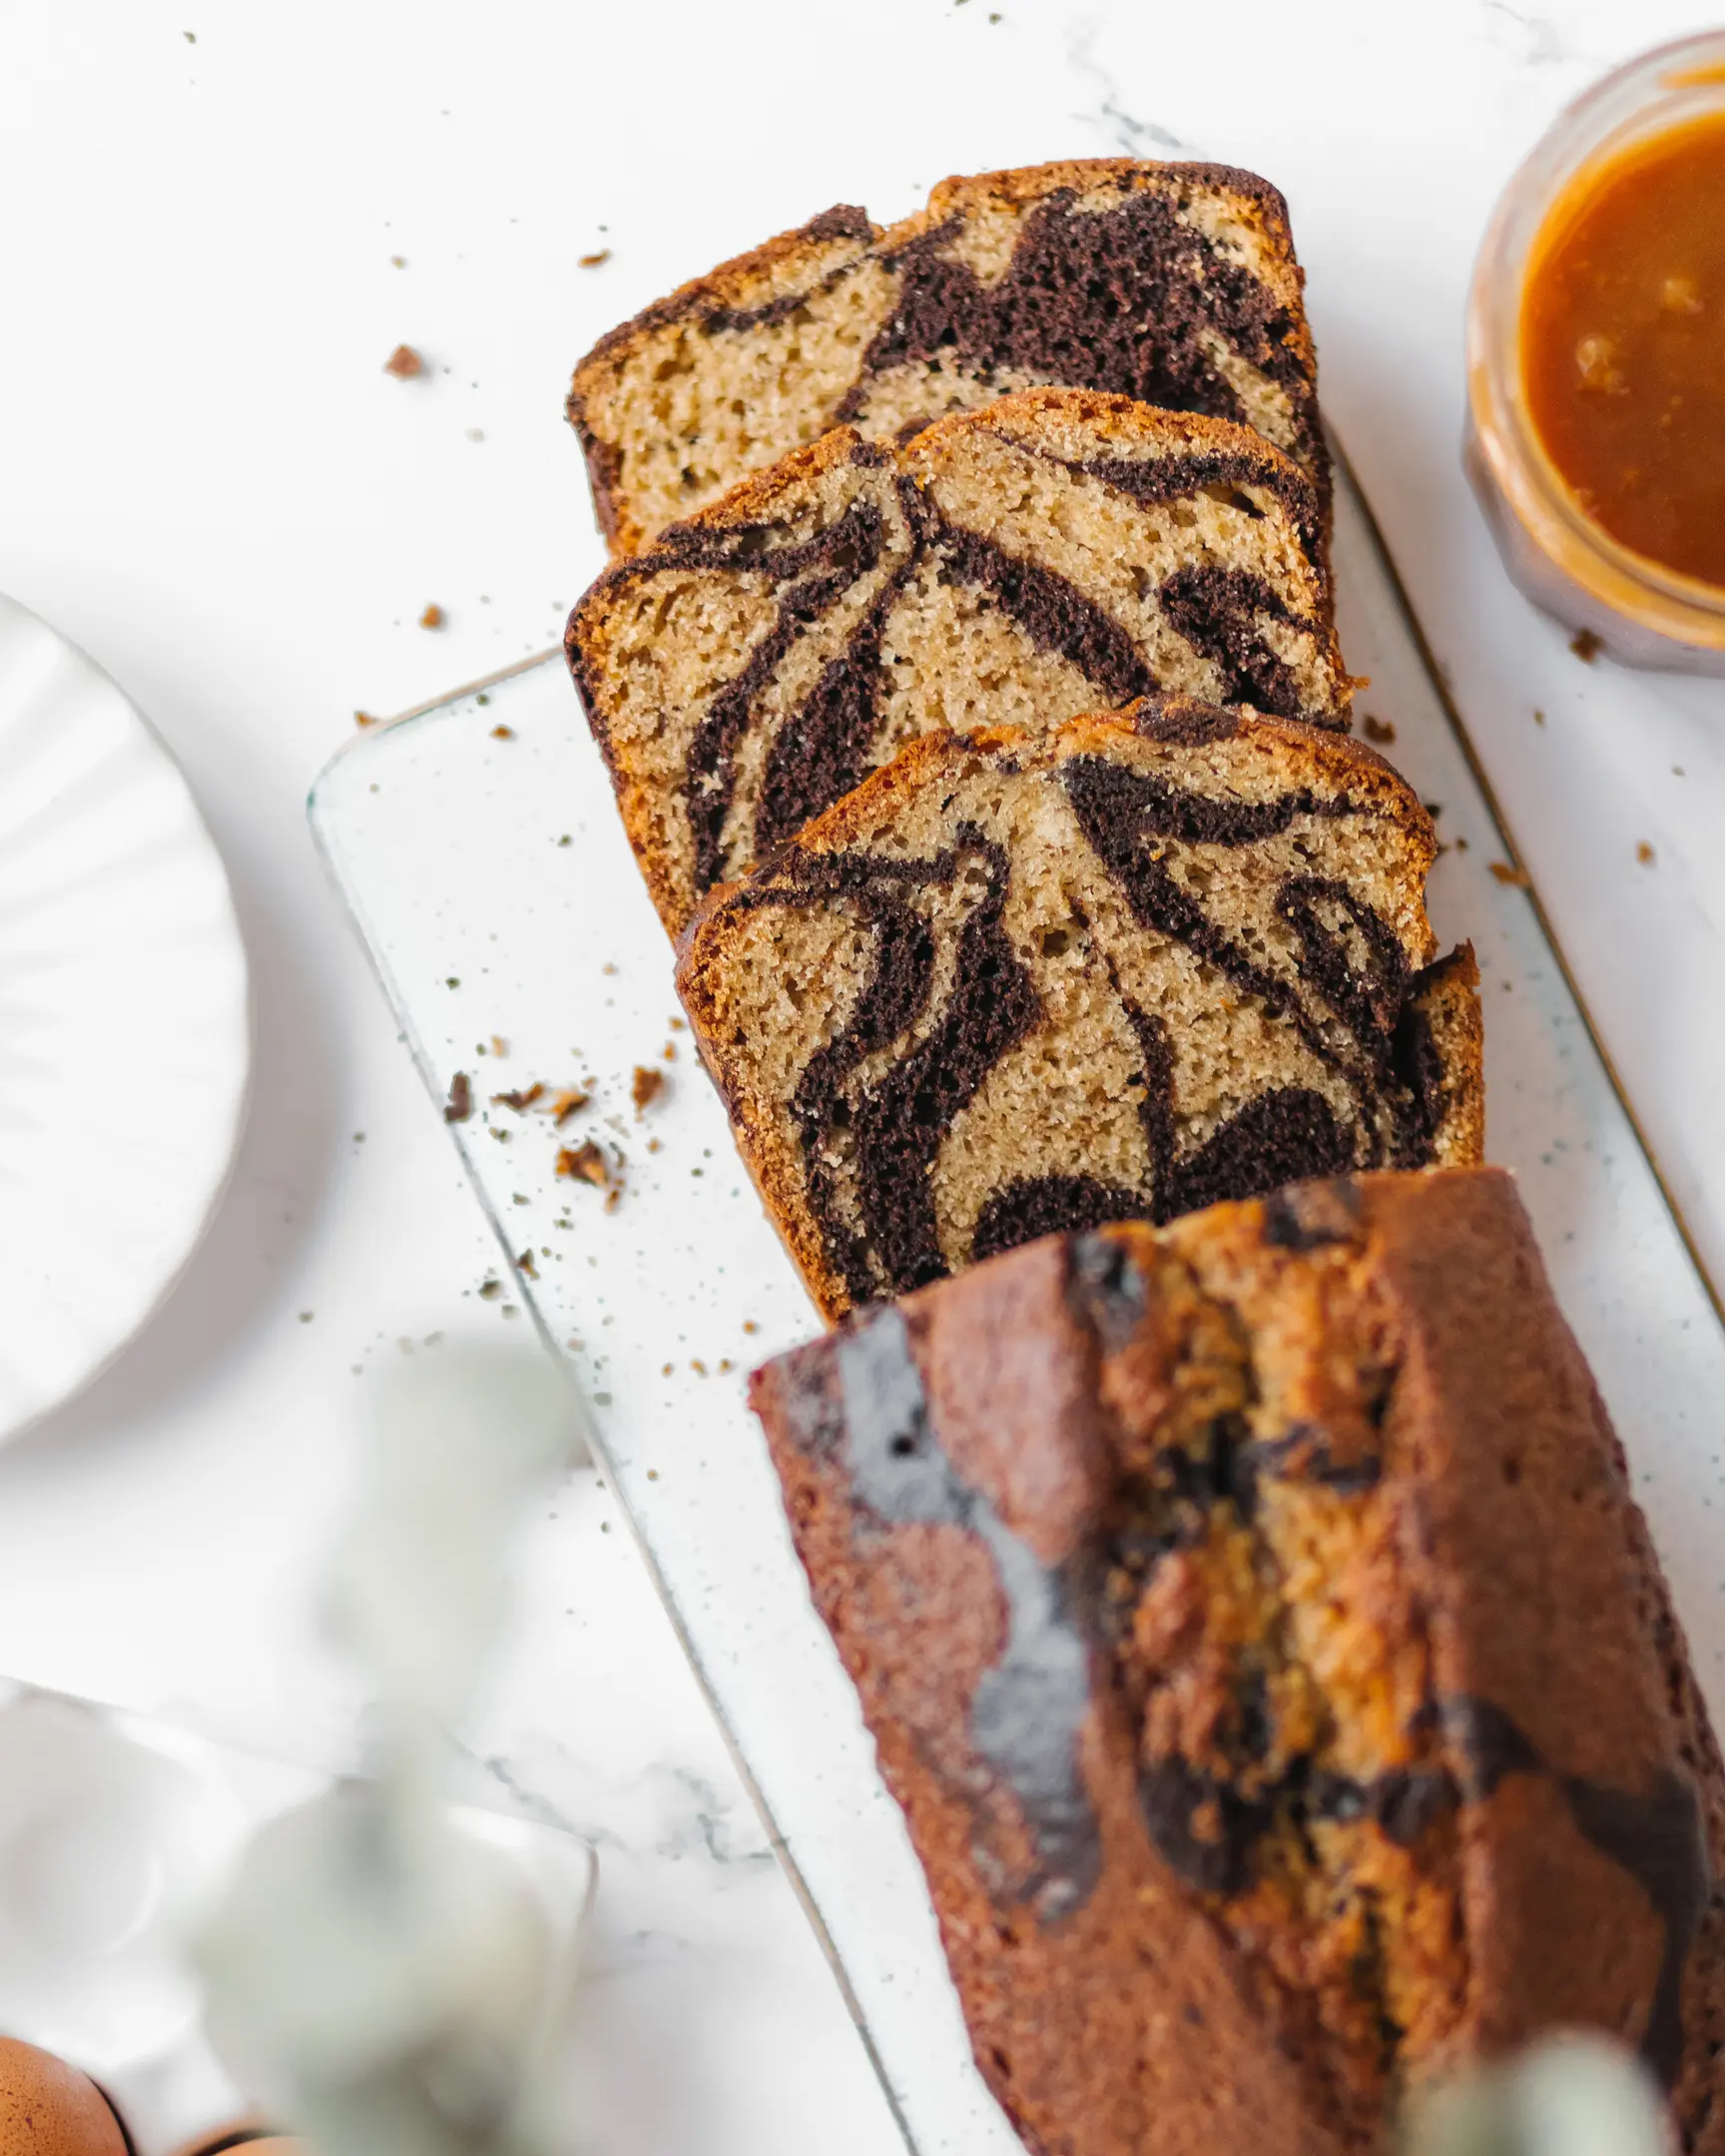 A sliced marble cake lies on a pastry rack to cool. A sliced marble cake lies on a pastry rack to cool.